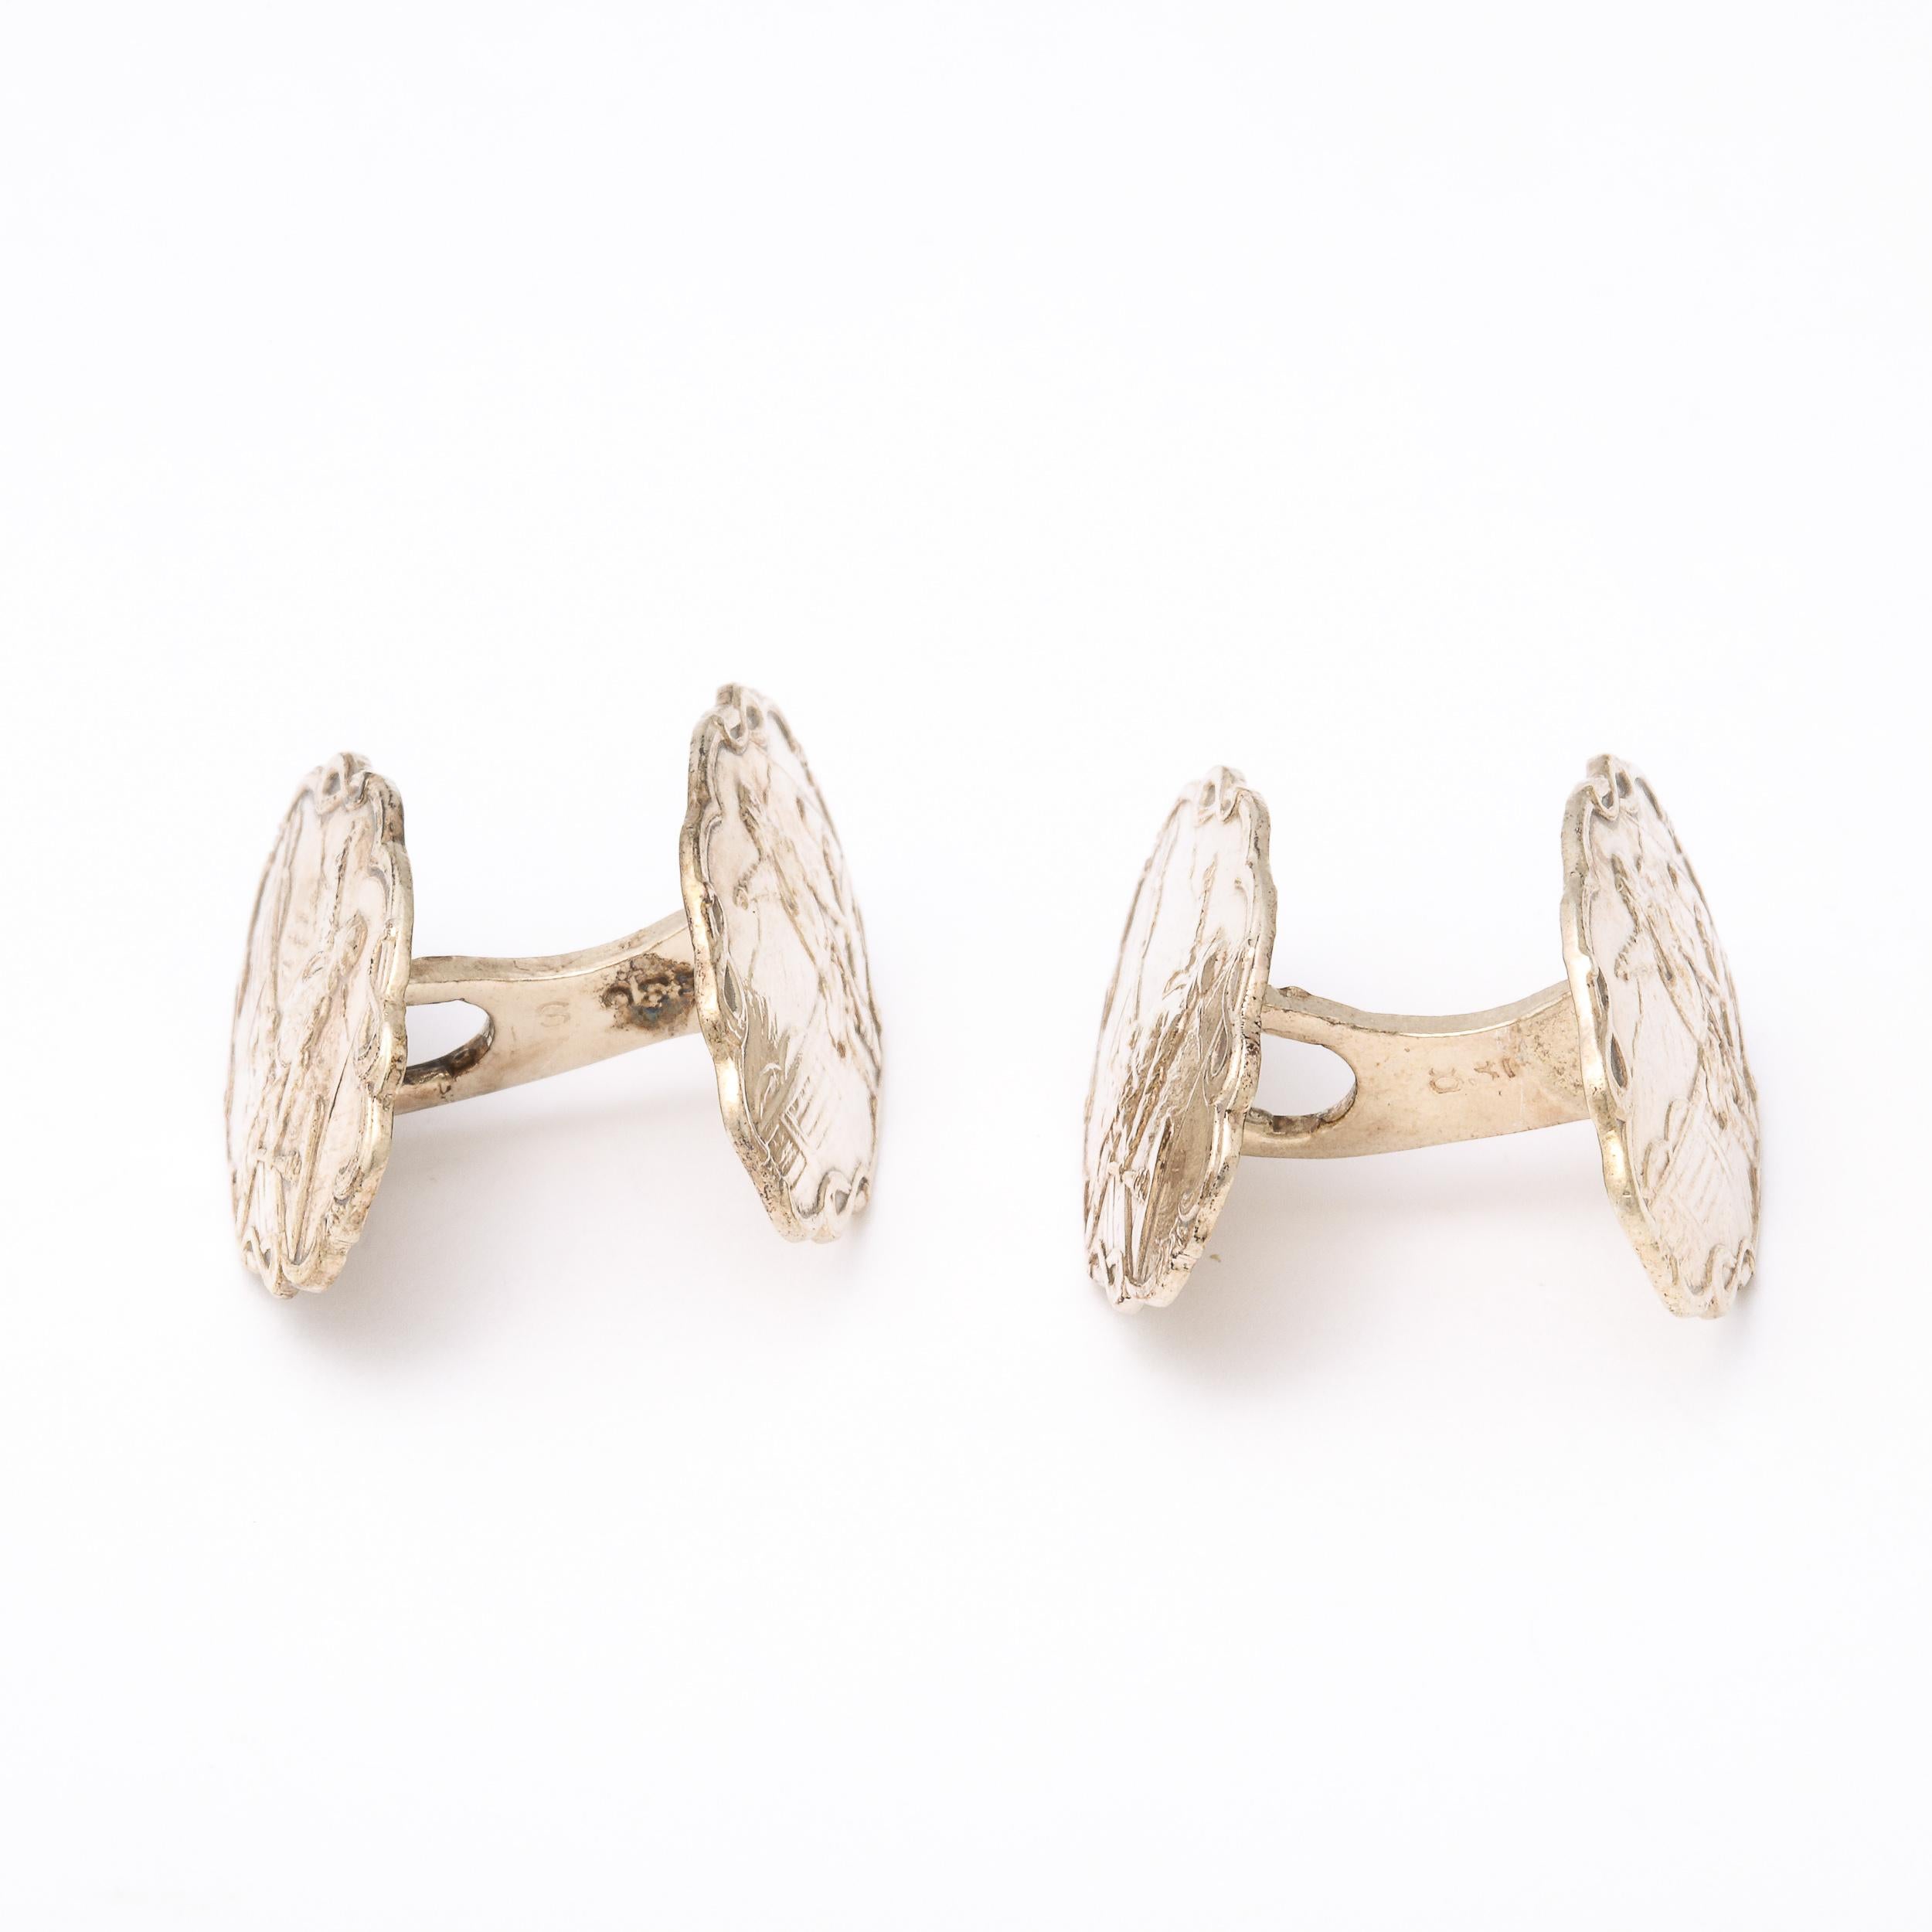 Pair of Sterling Silver 'OTC' Cufflinks W/ Pointing Sailor by H.C. Ostrem  In Excellent Condition For Sale In New York, NY